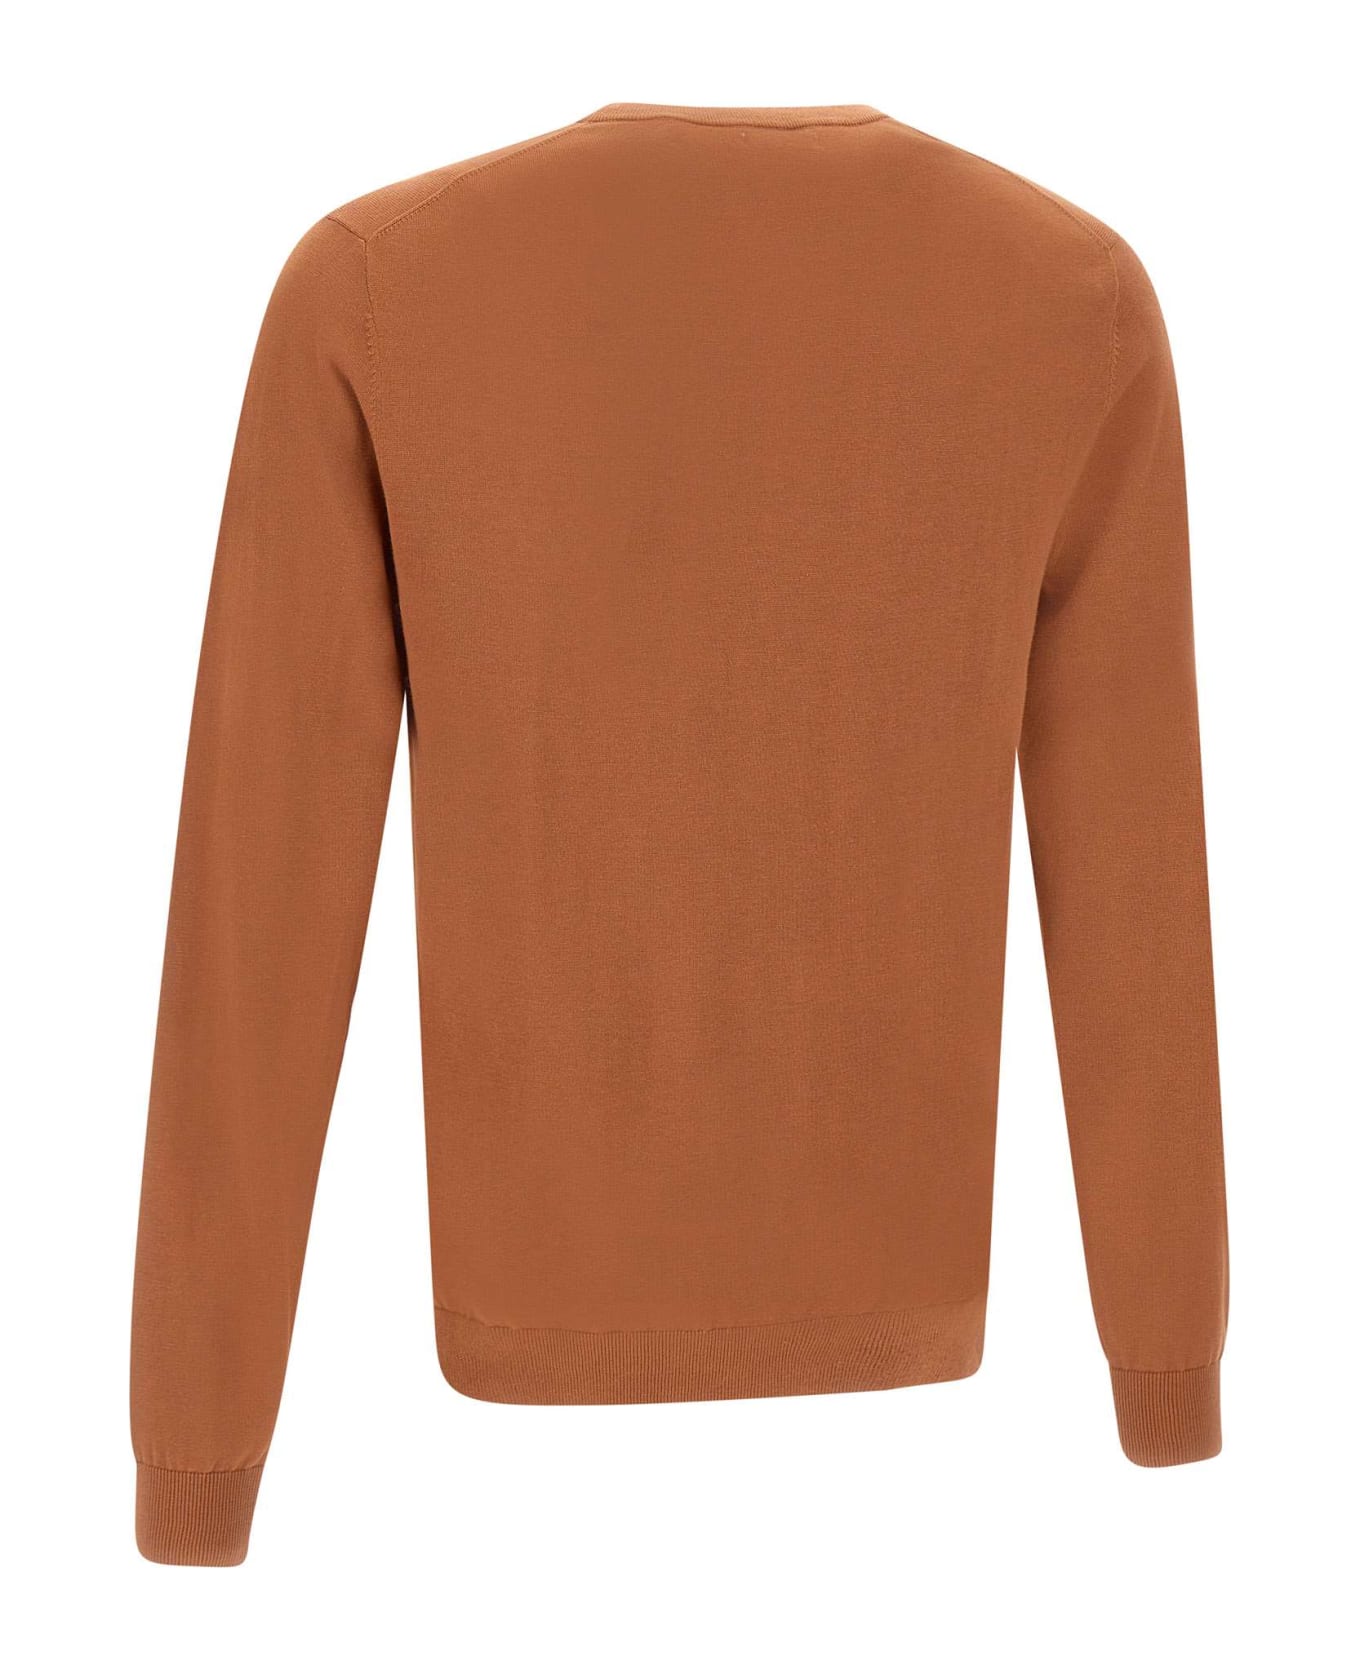 Sun 68 "solid" Cotton Sweater - BROWN